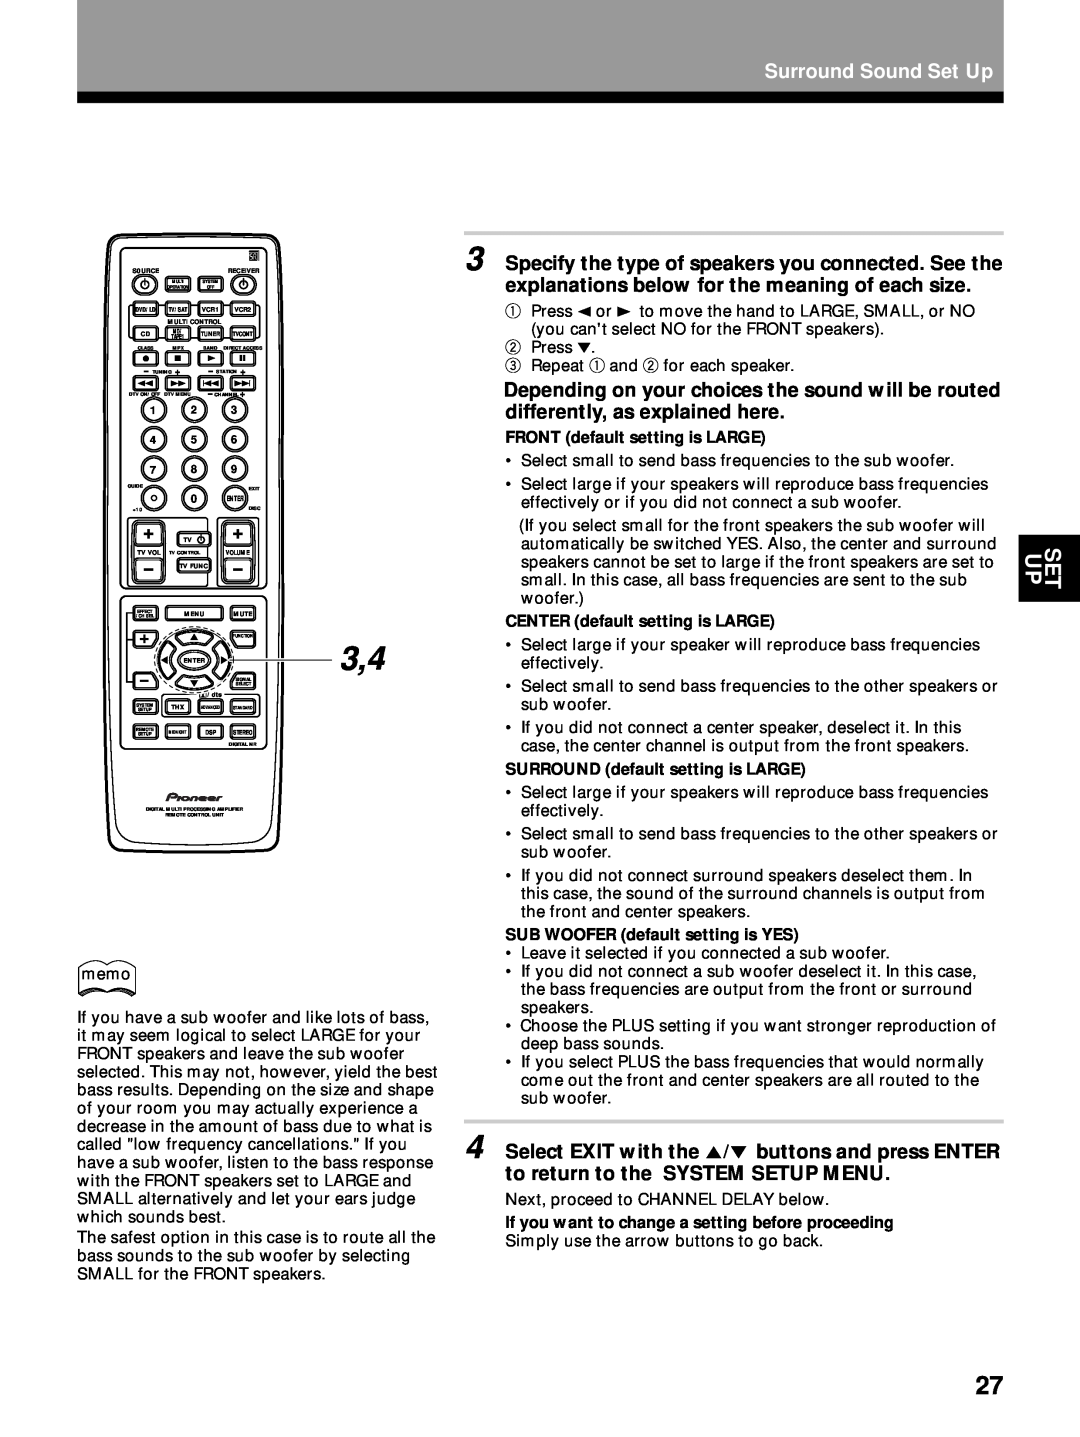 Pioneer VSX-27TX manual FRONT default setting is LARGE, CENTER default setting is LARGE, SURROUND default setting is LARGE 